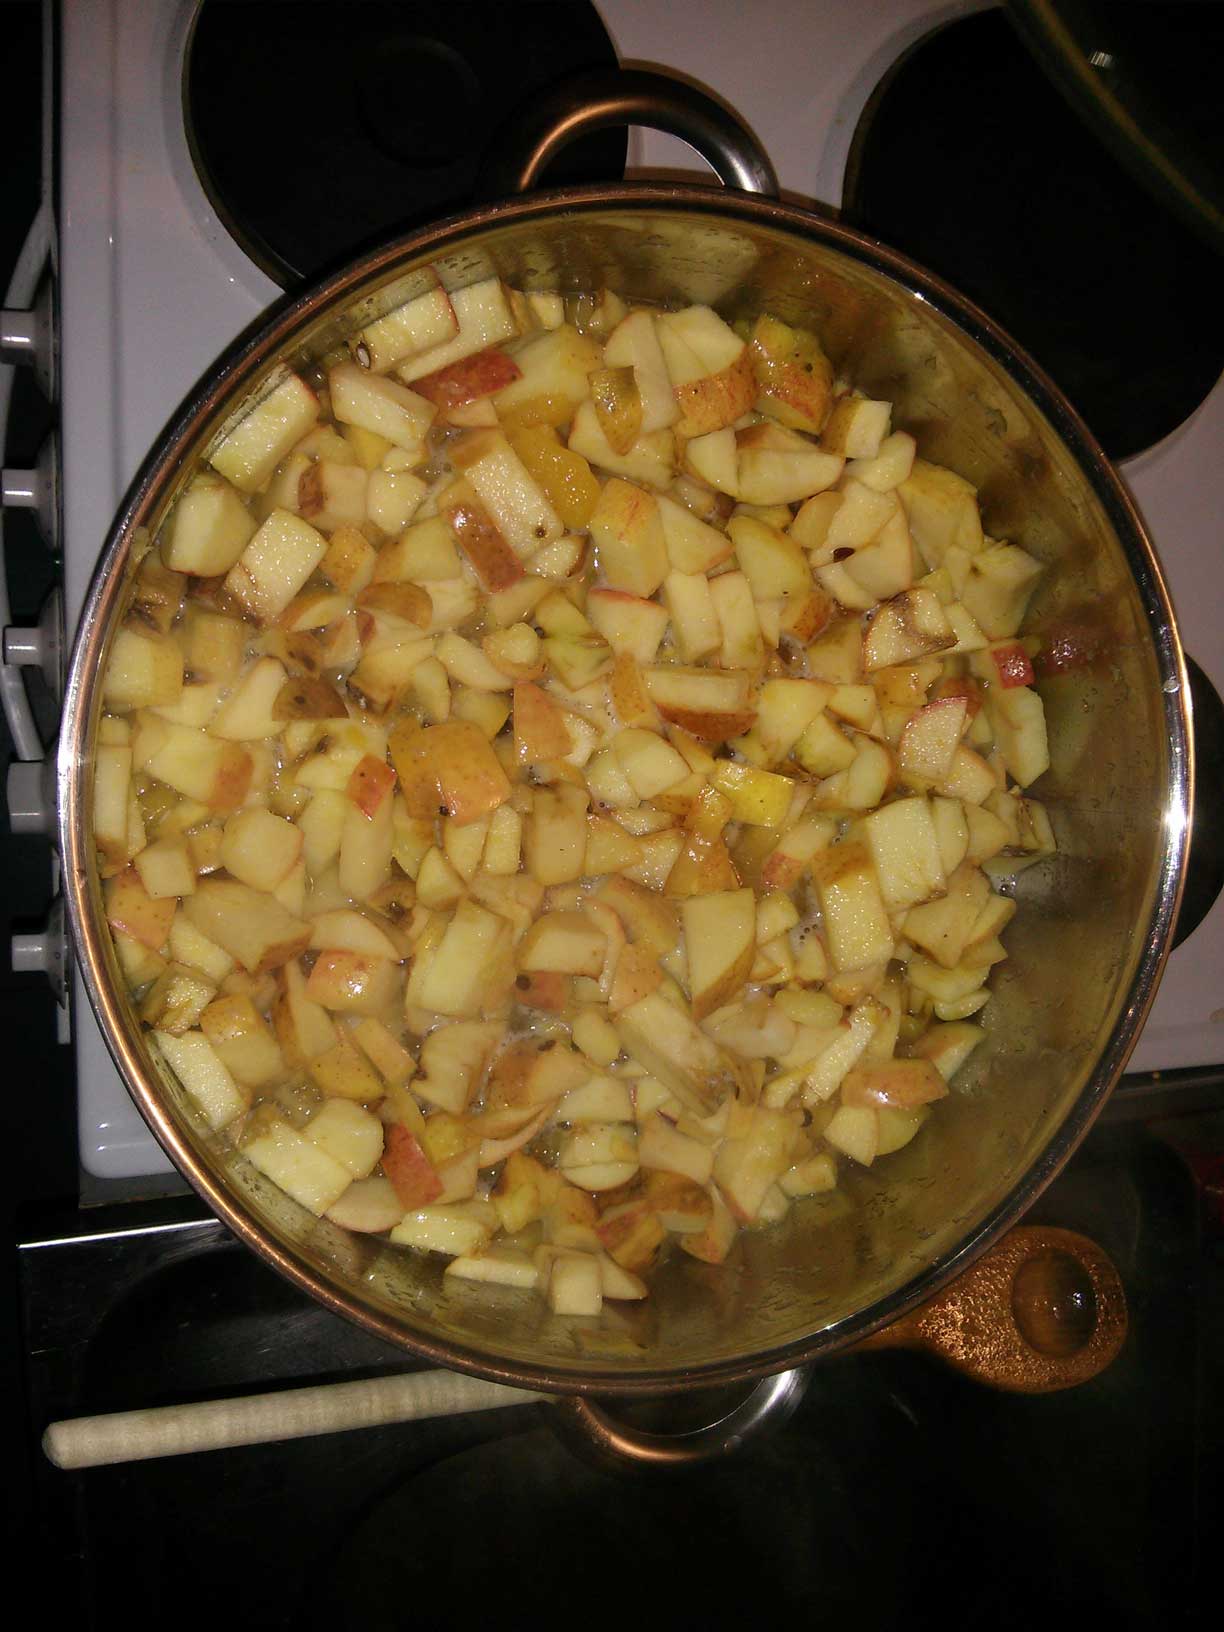 Apples and mango before being cooked